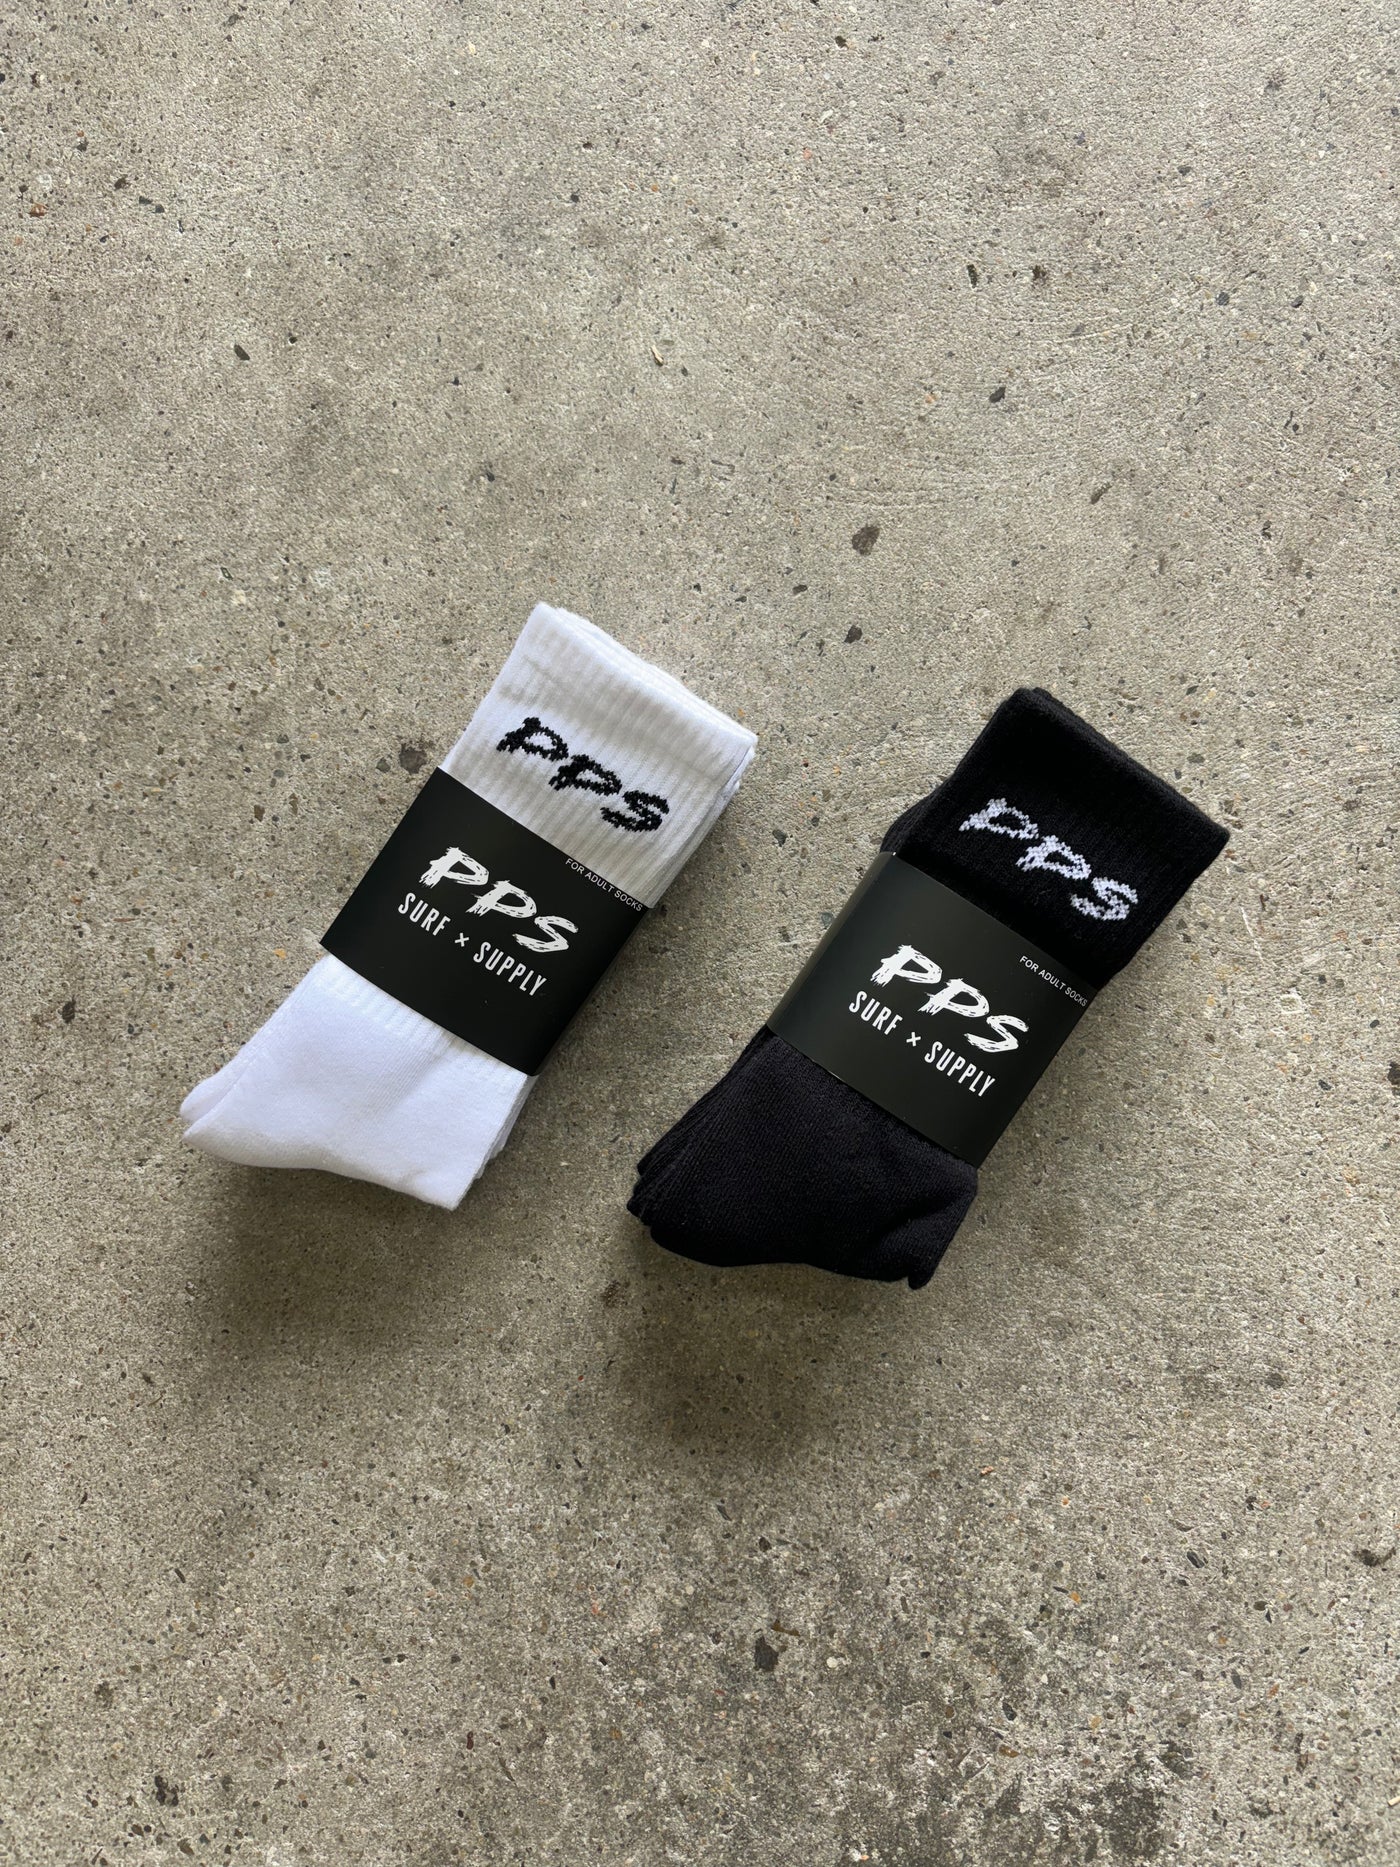 PPS SUPPLY SOCK 3 PACK ADULTS